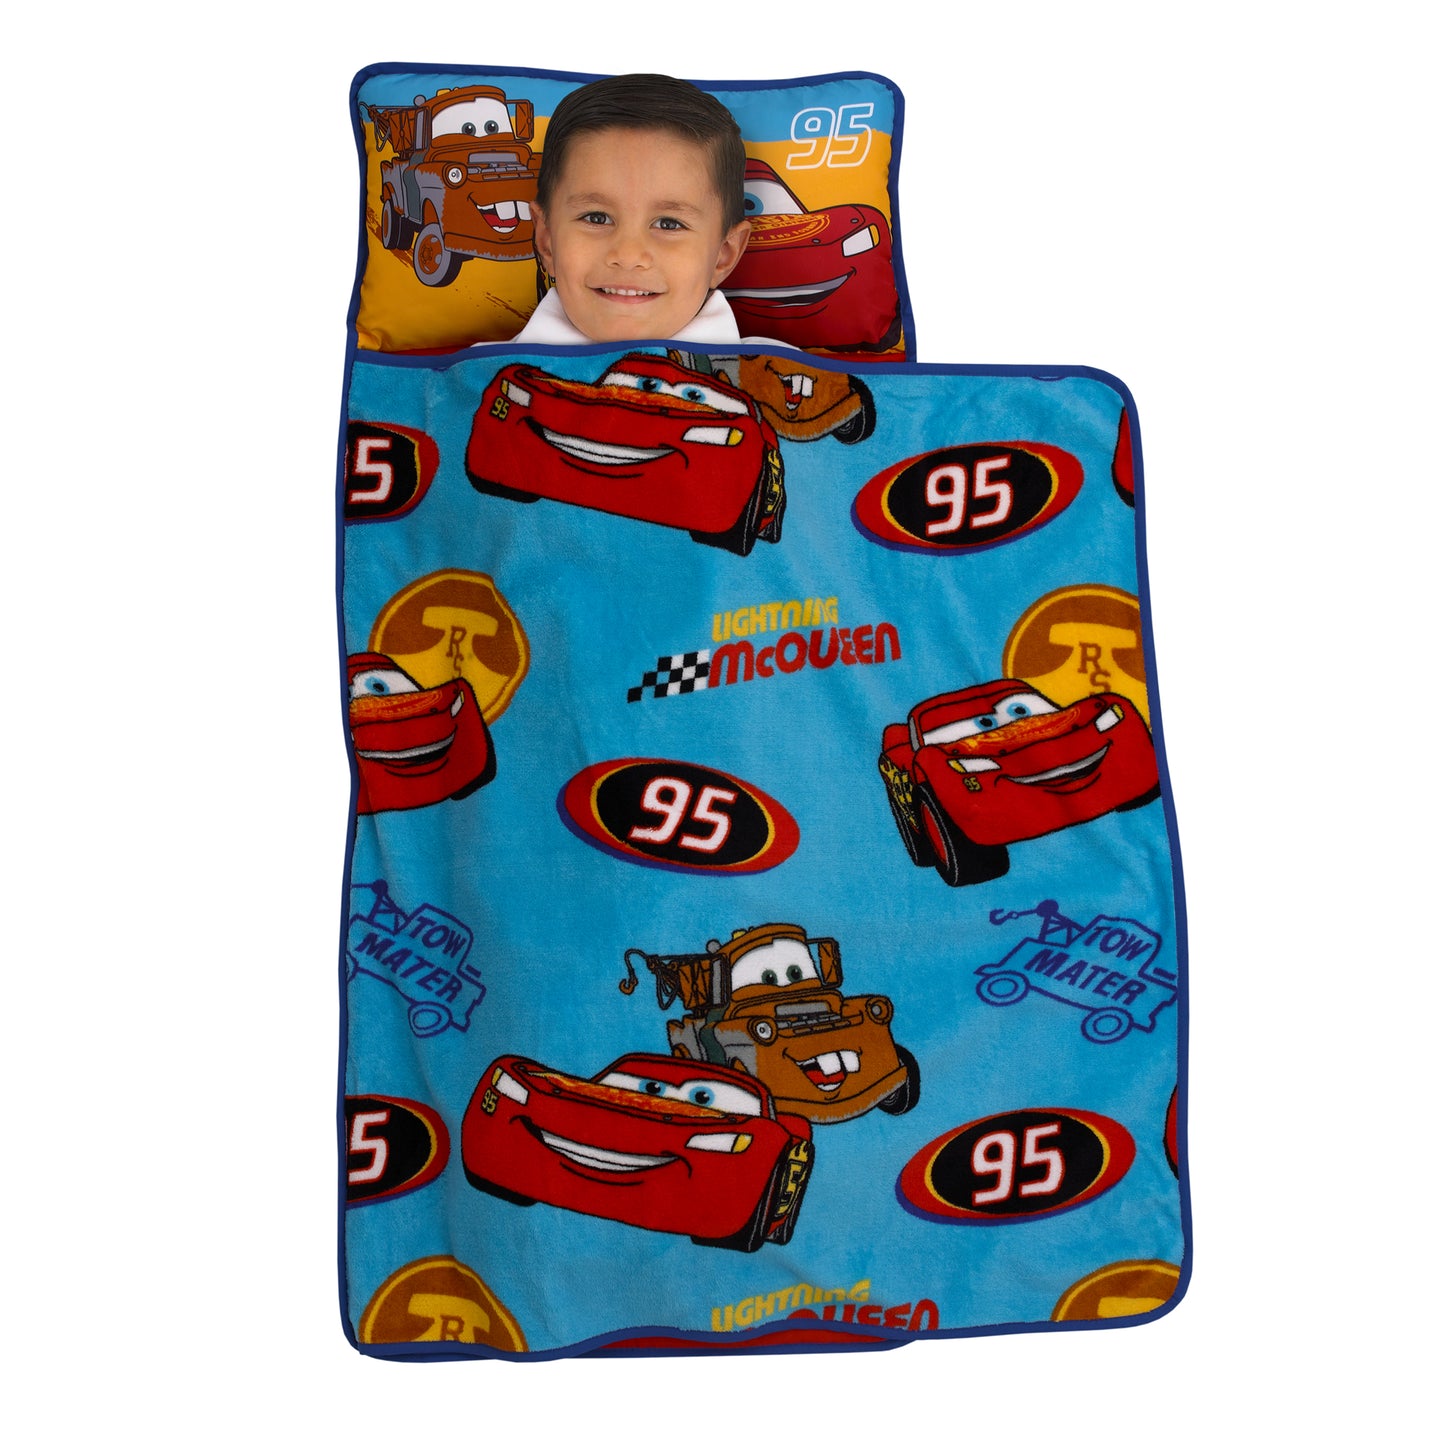 Disney Cars Radiator Springs Blue and Red Lightning McQueen and Tow-Mater Toddler Nap Mat